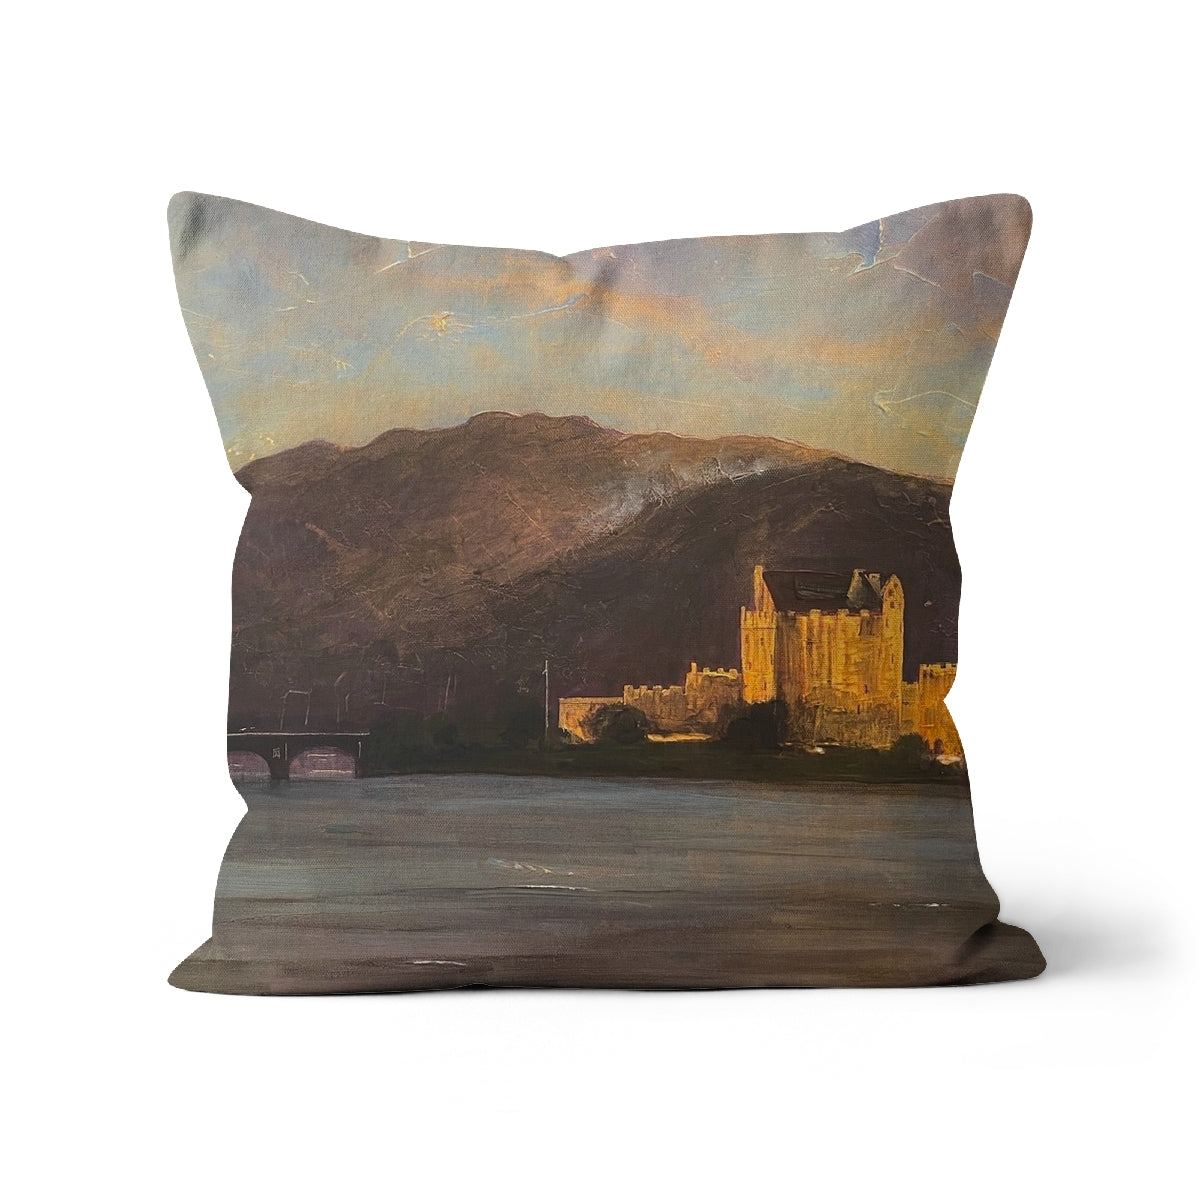 Eilean Donan Castle Art Gifts Cushion-Cushions-Historic & Iconic Scotland Art Gallery-Linen-18"x18"-Paintings, Prints, Homeware, Art Gifts From Scotland By Scottish Artist Kevin Hunter